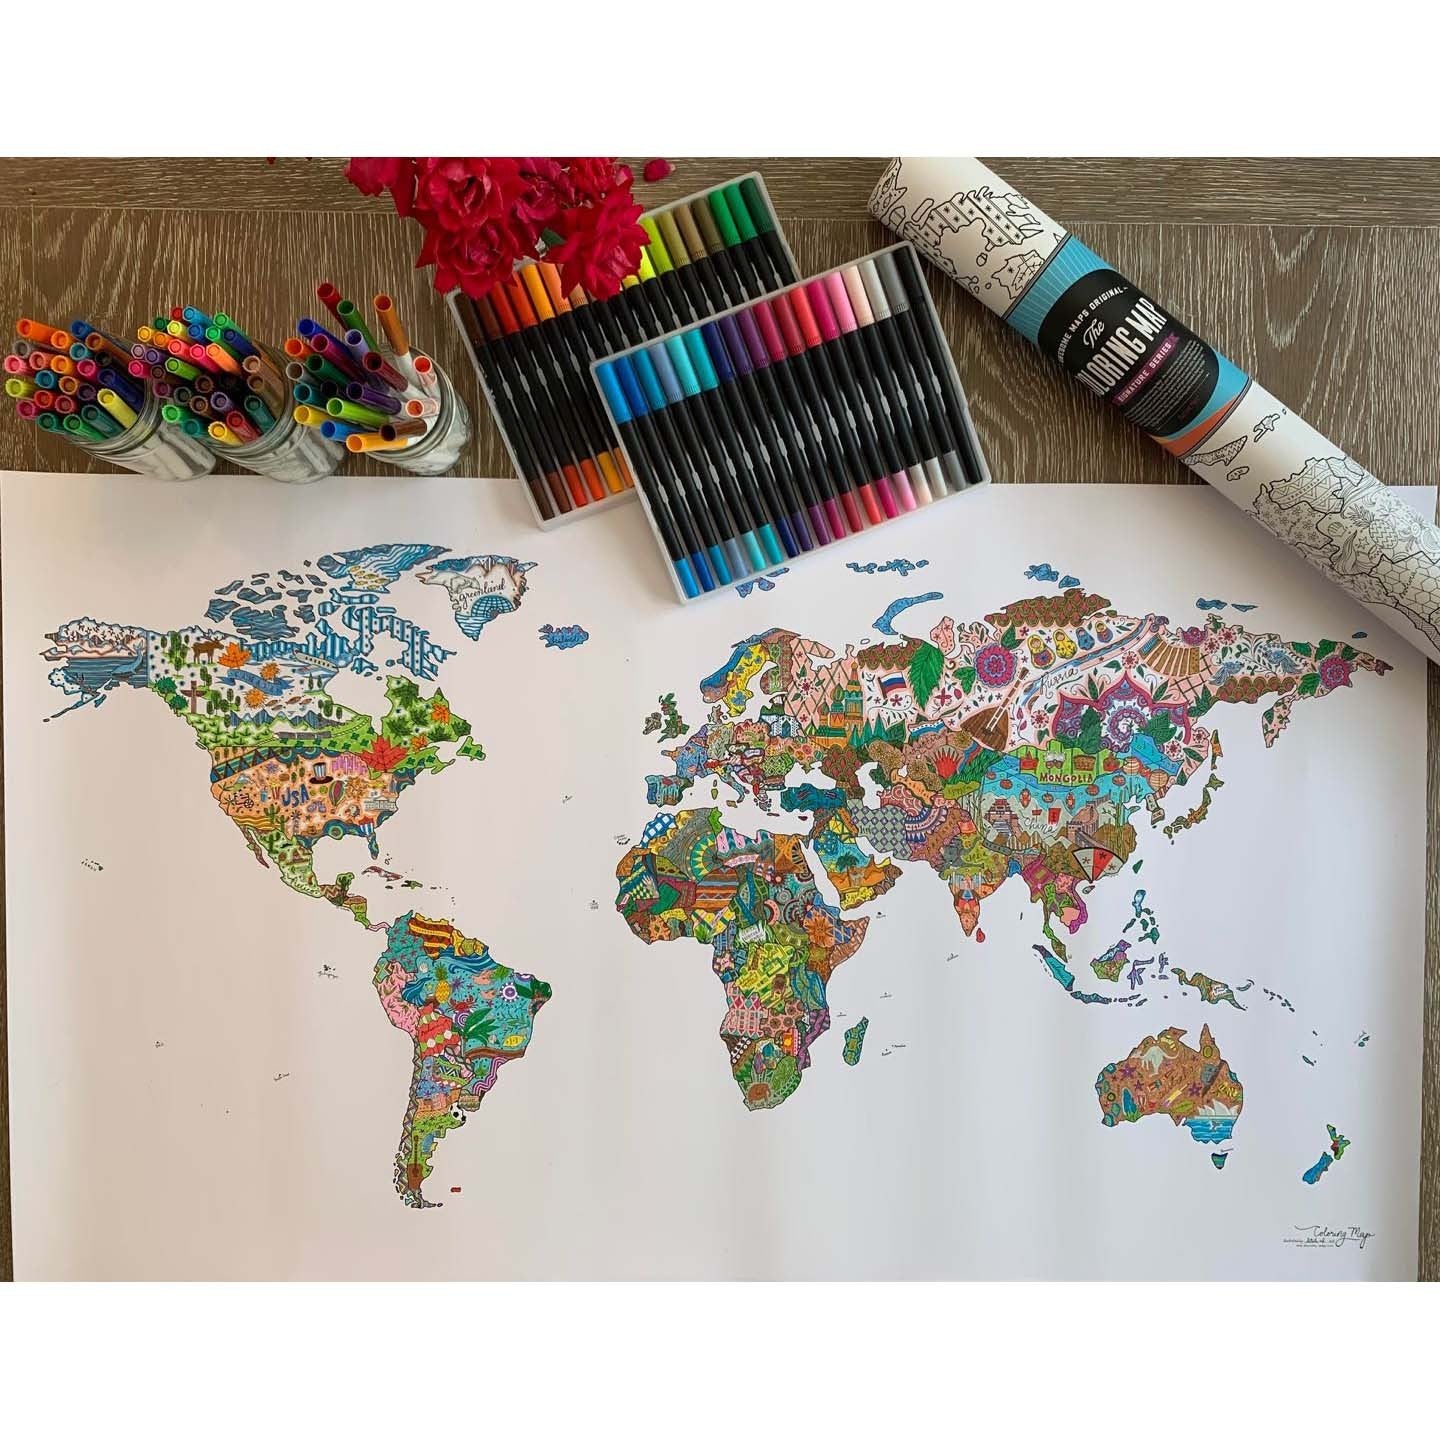 Awesome Maps - Coloring World Map Poster